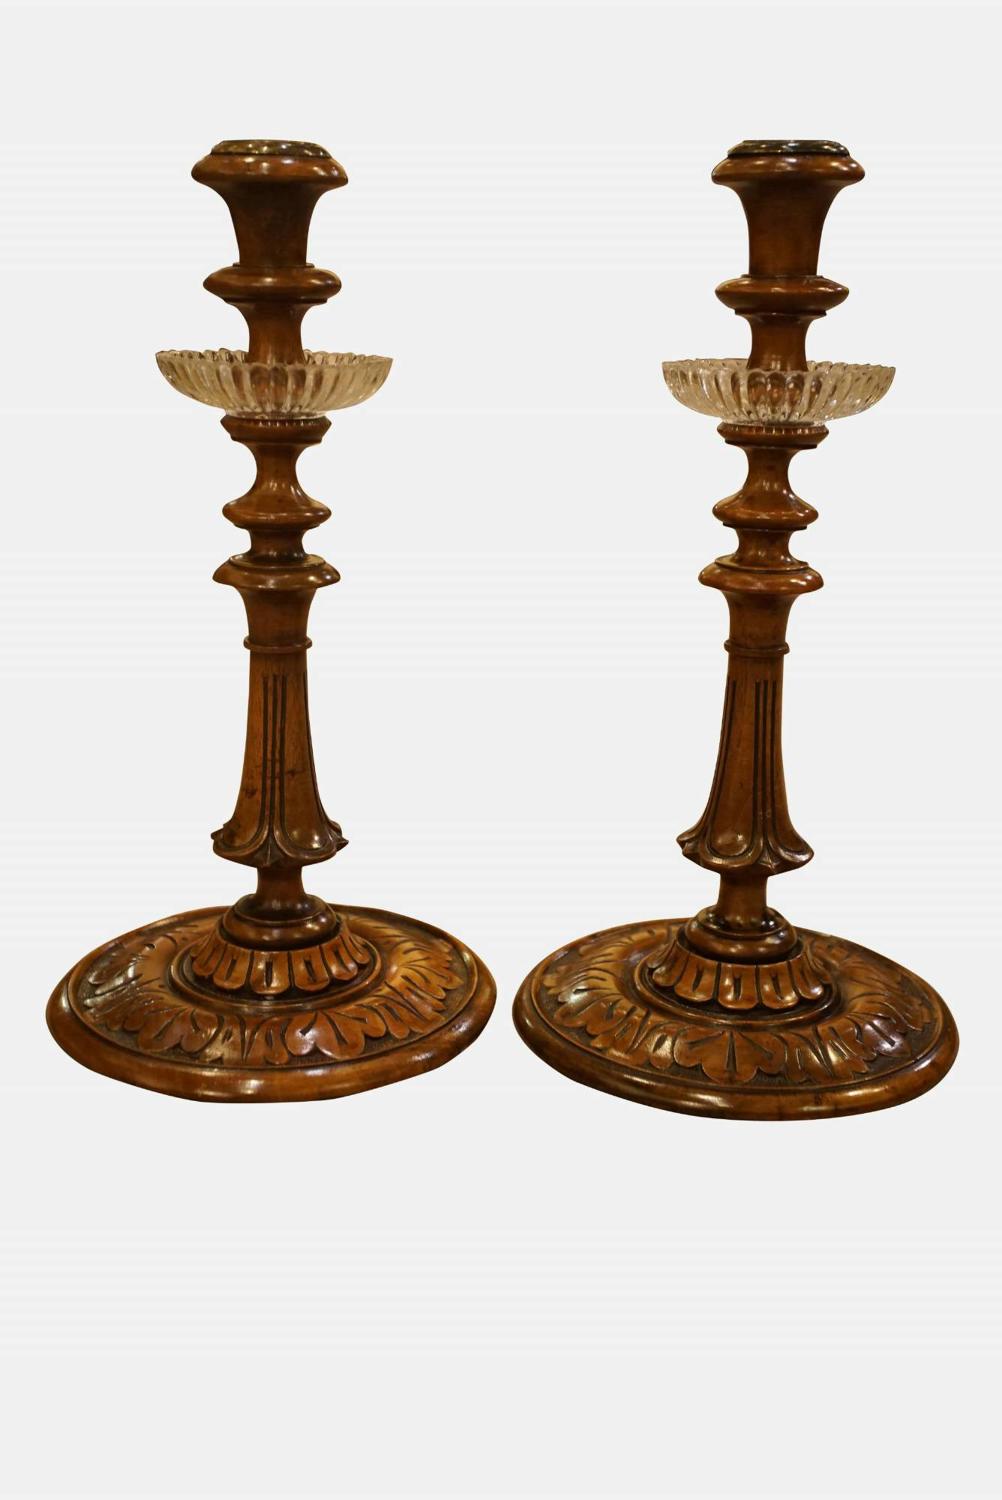 Pair of Mid 19thC Carved Walnut Candlesticks